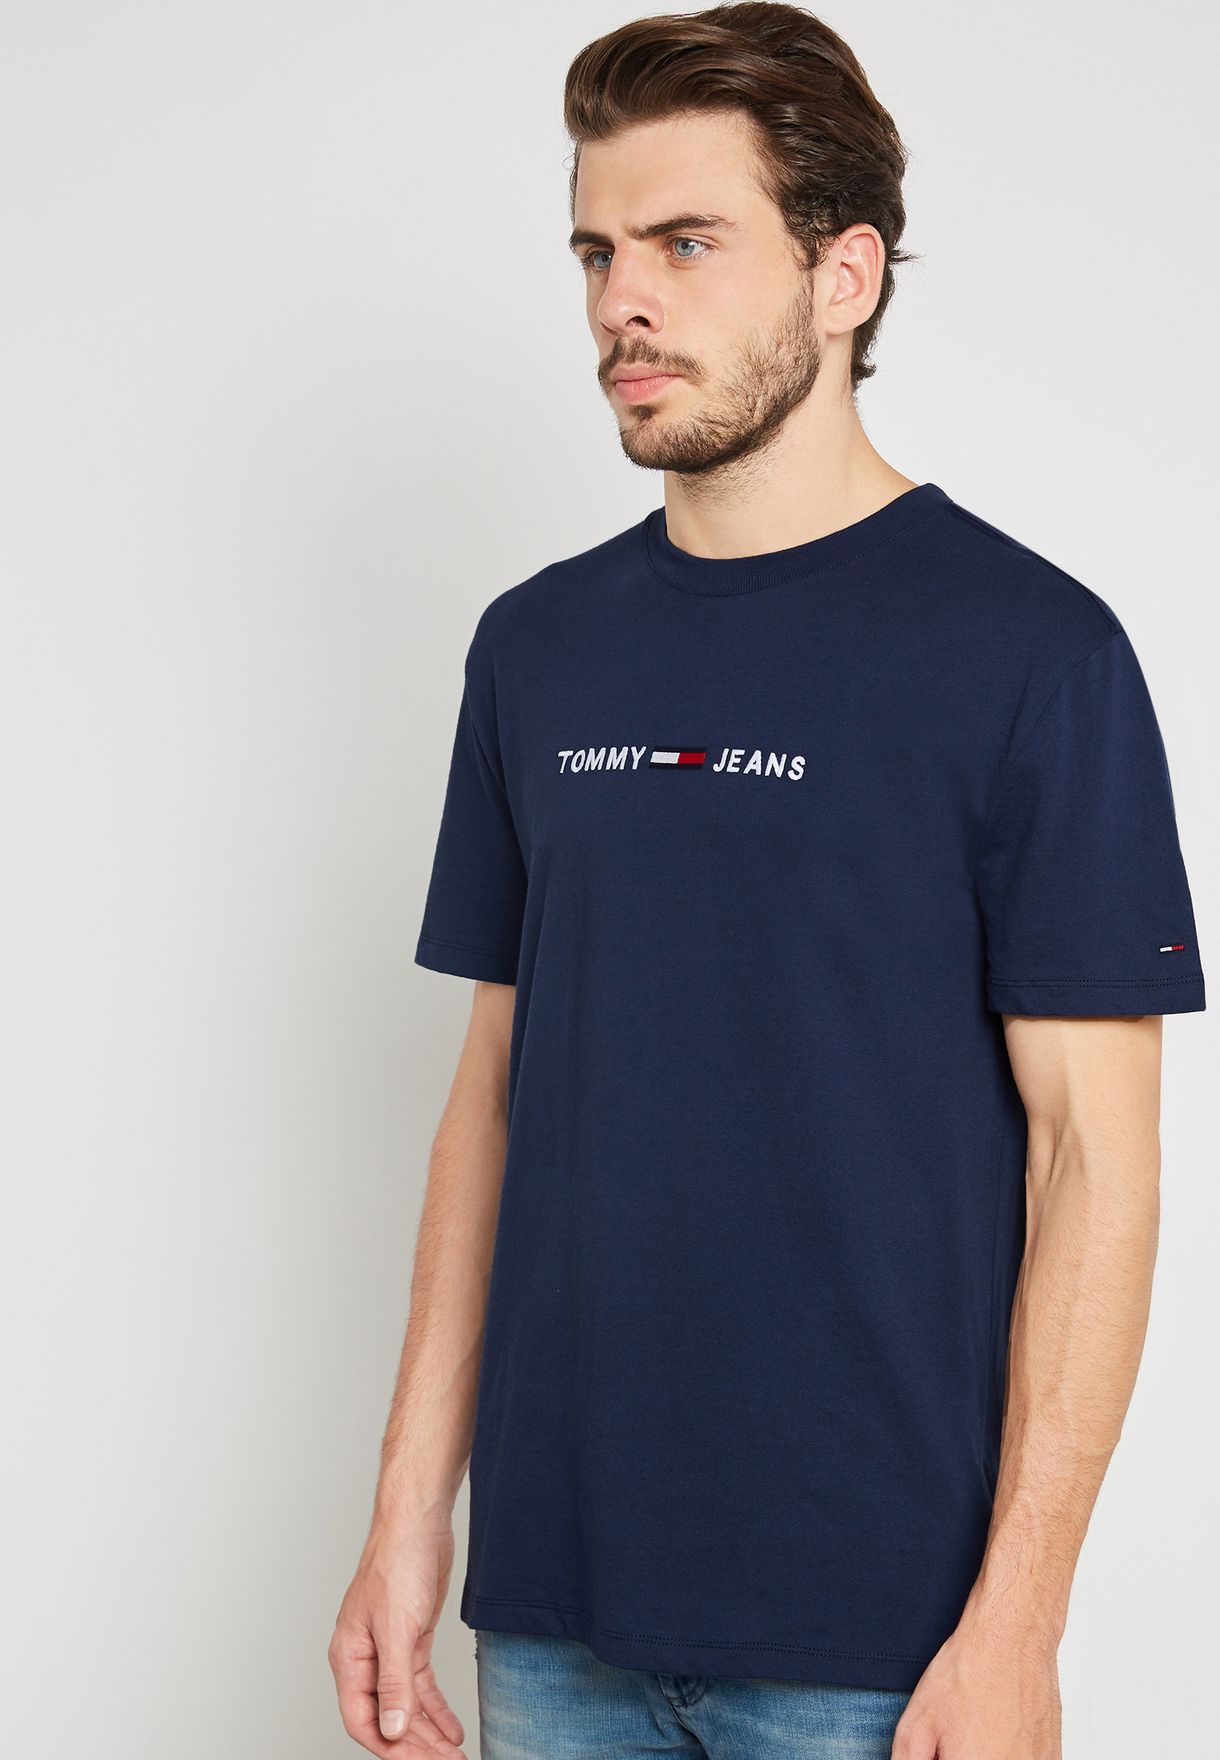 tommy jeans small text tee